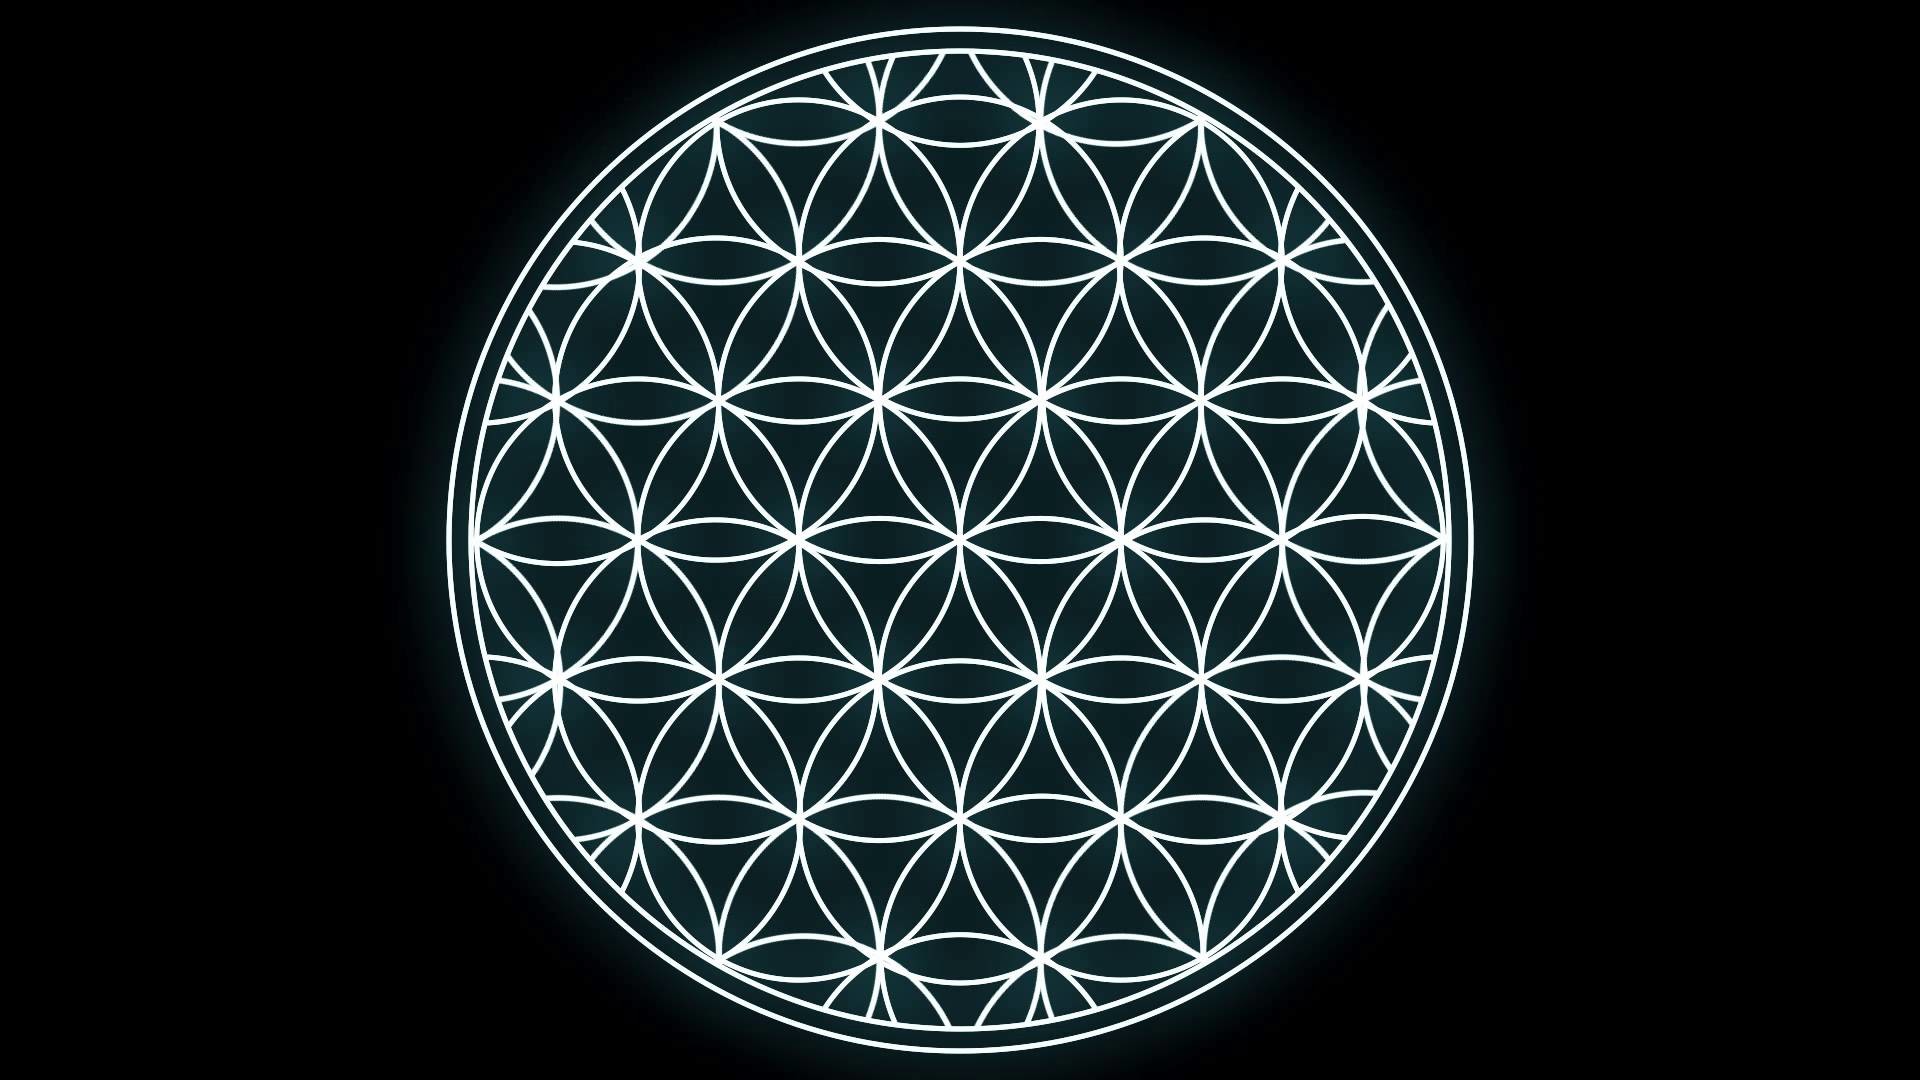 1920x1080 3. The Flower of Life